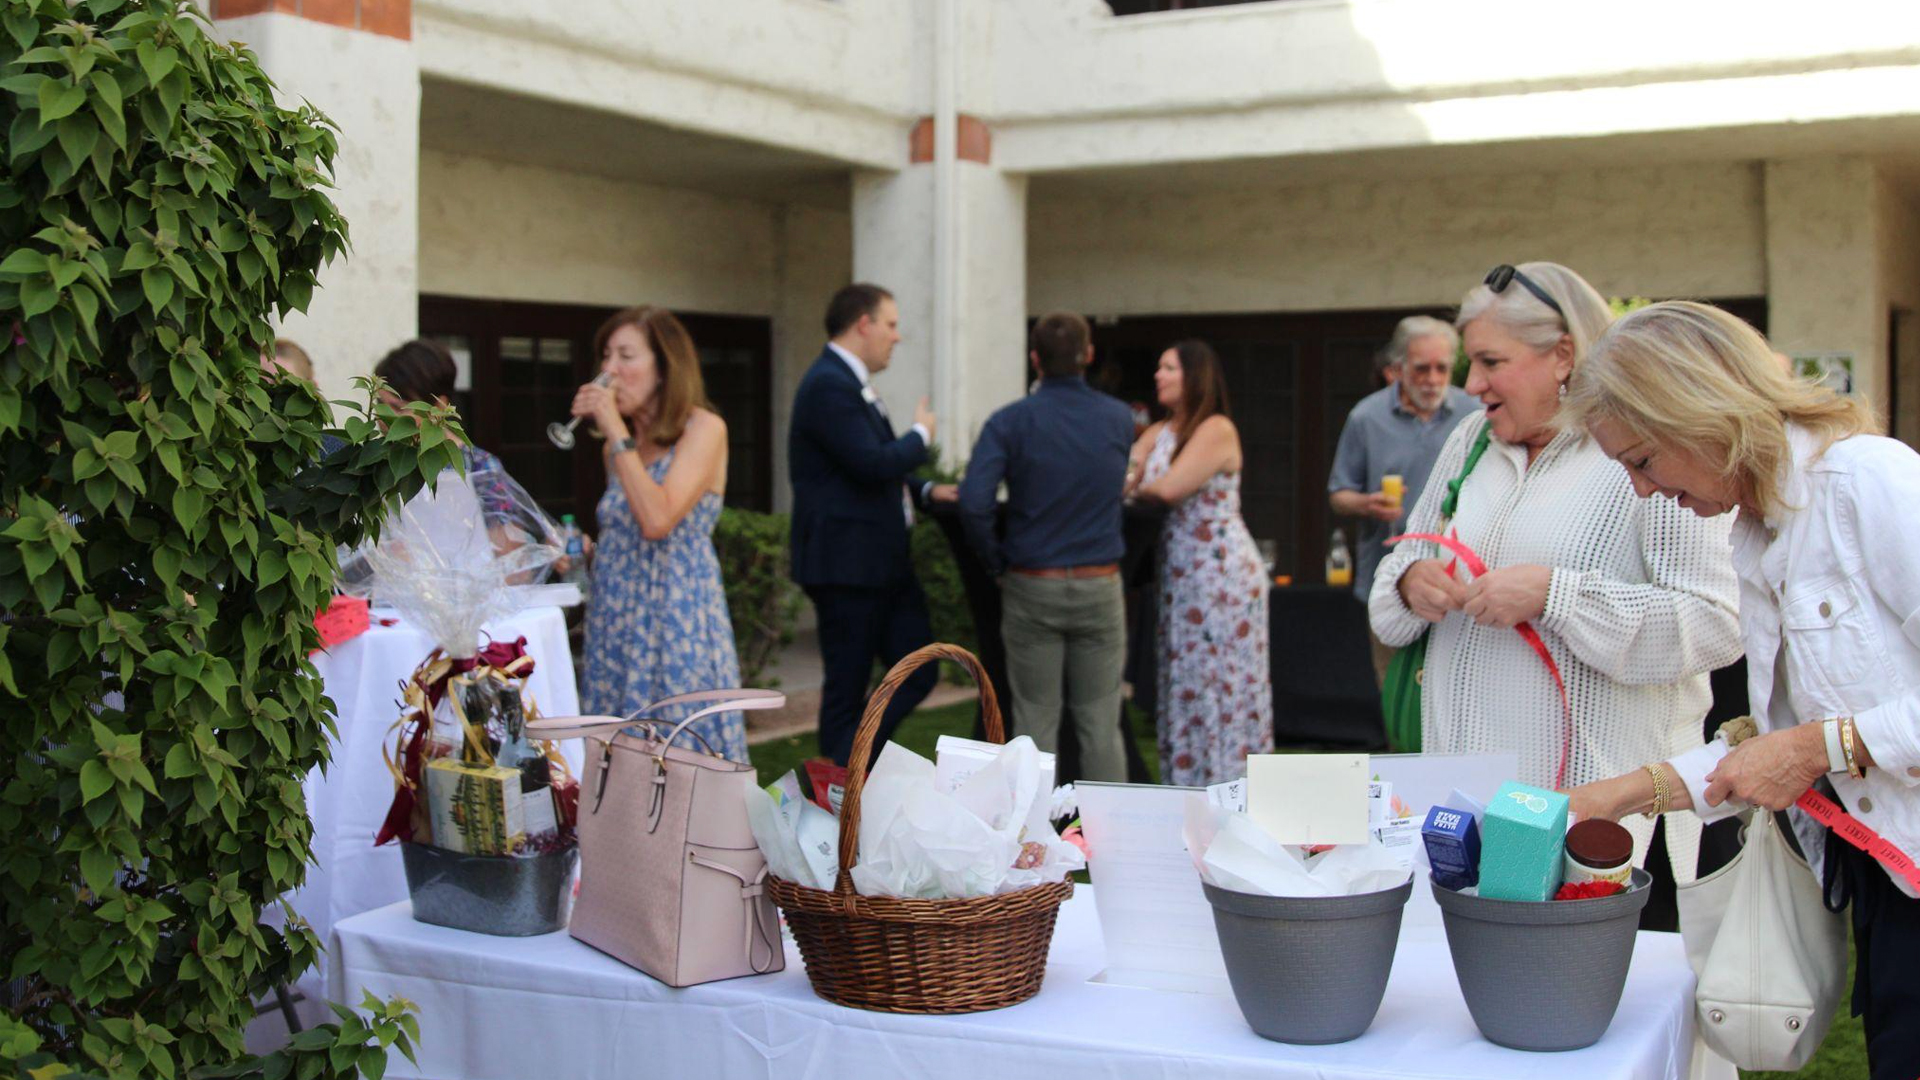 Guests enjoyed a silent auction and raffle, with prizes valued at over $3,500